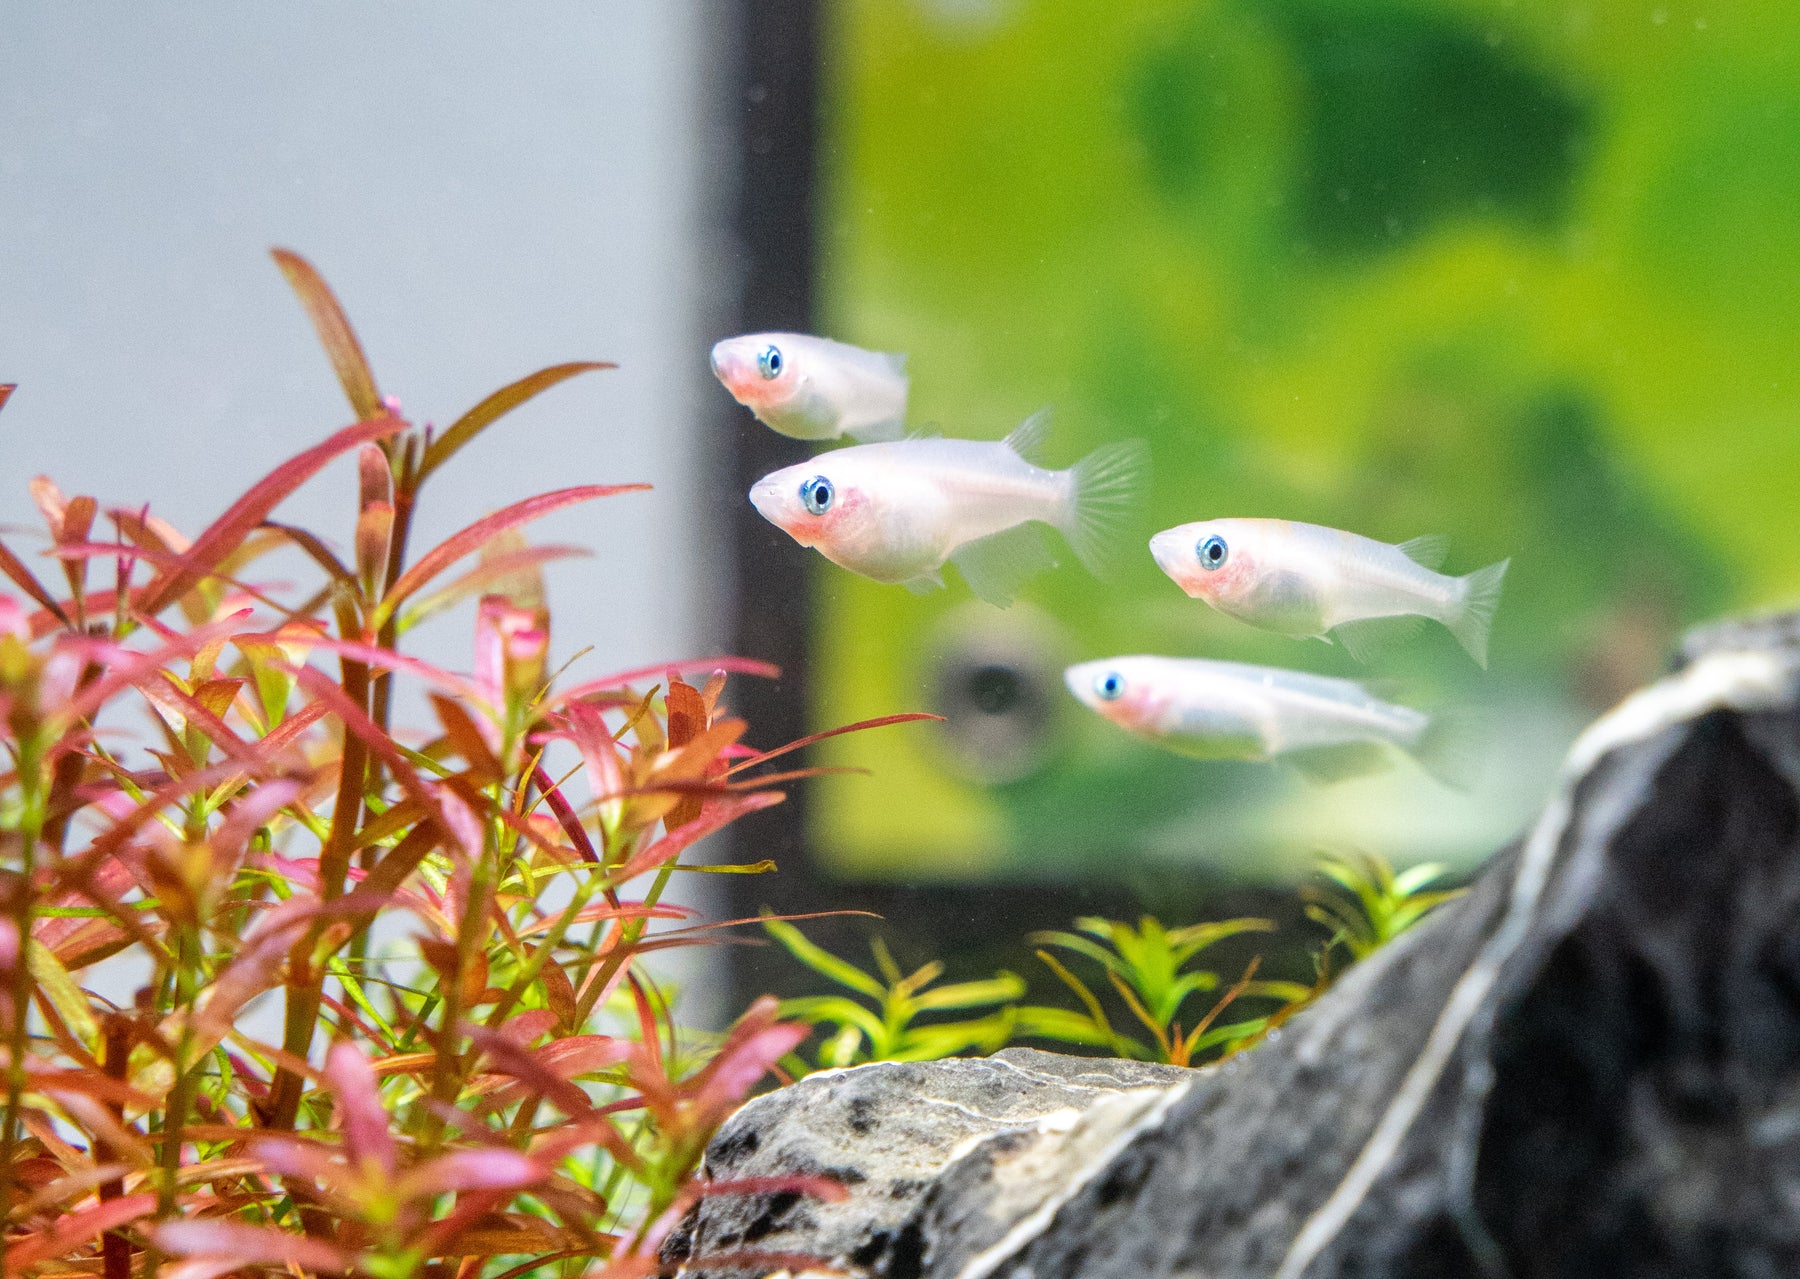 Japanese Rice Fish Care Guide